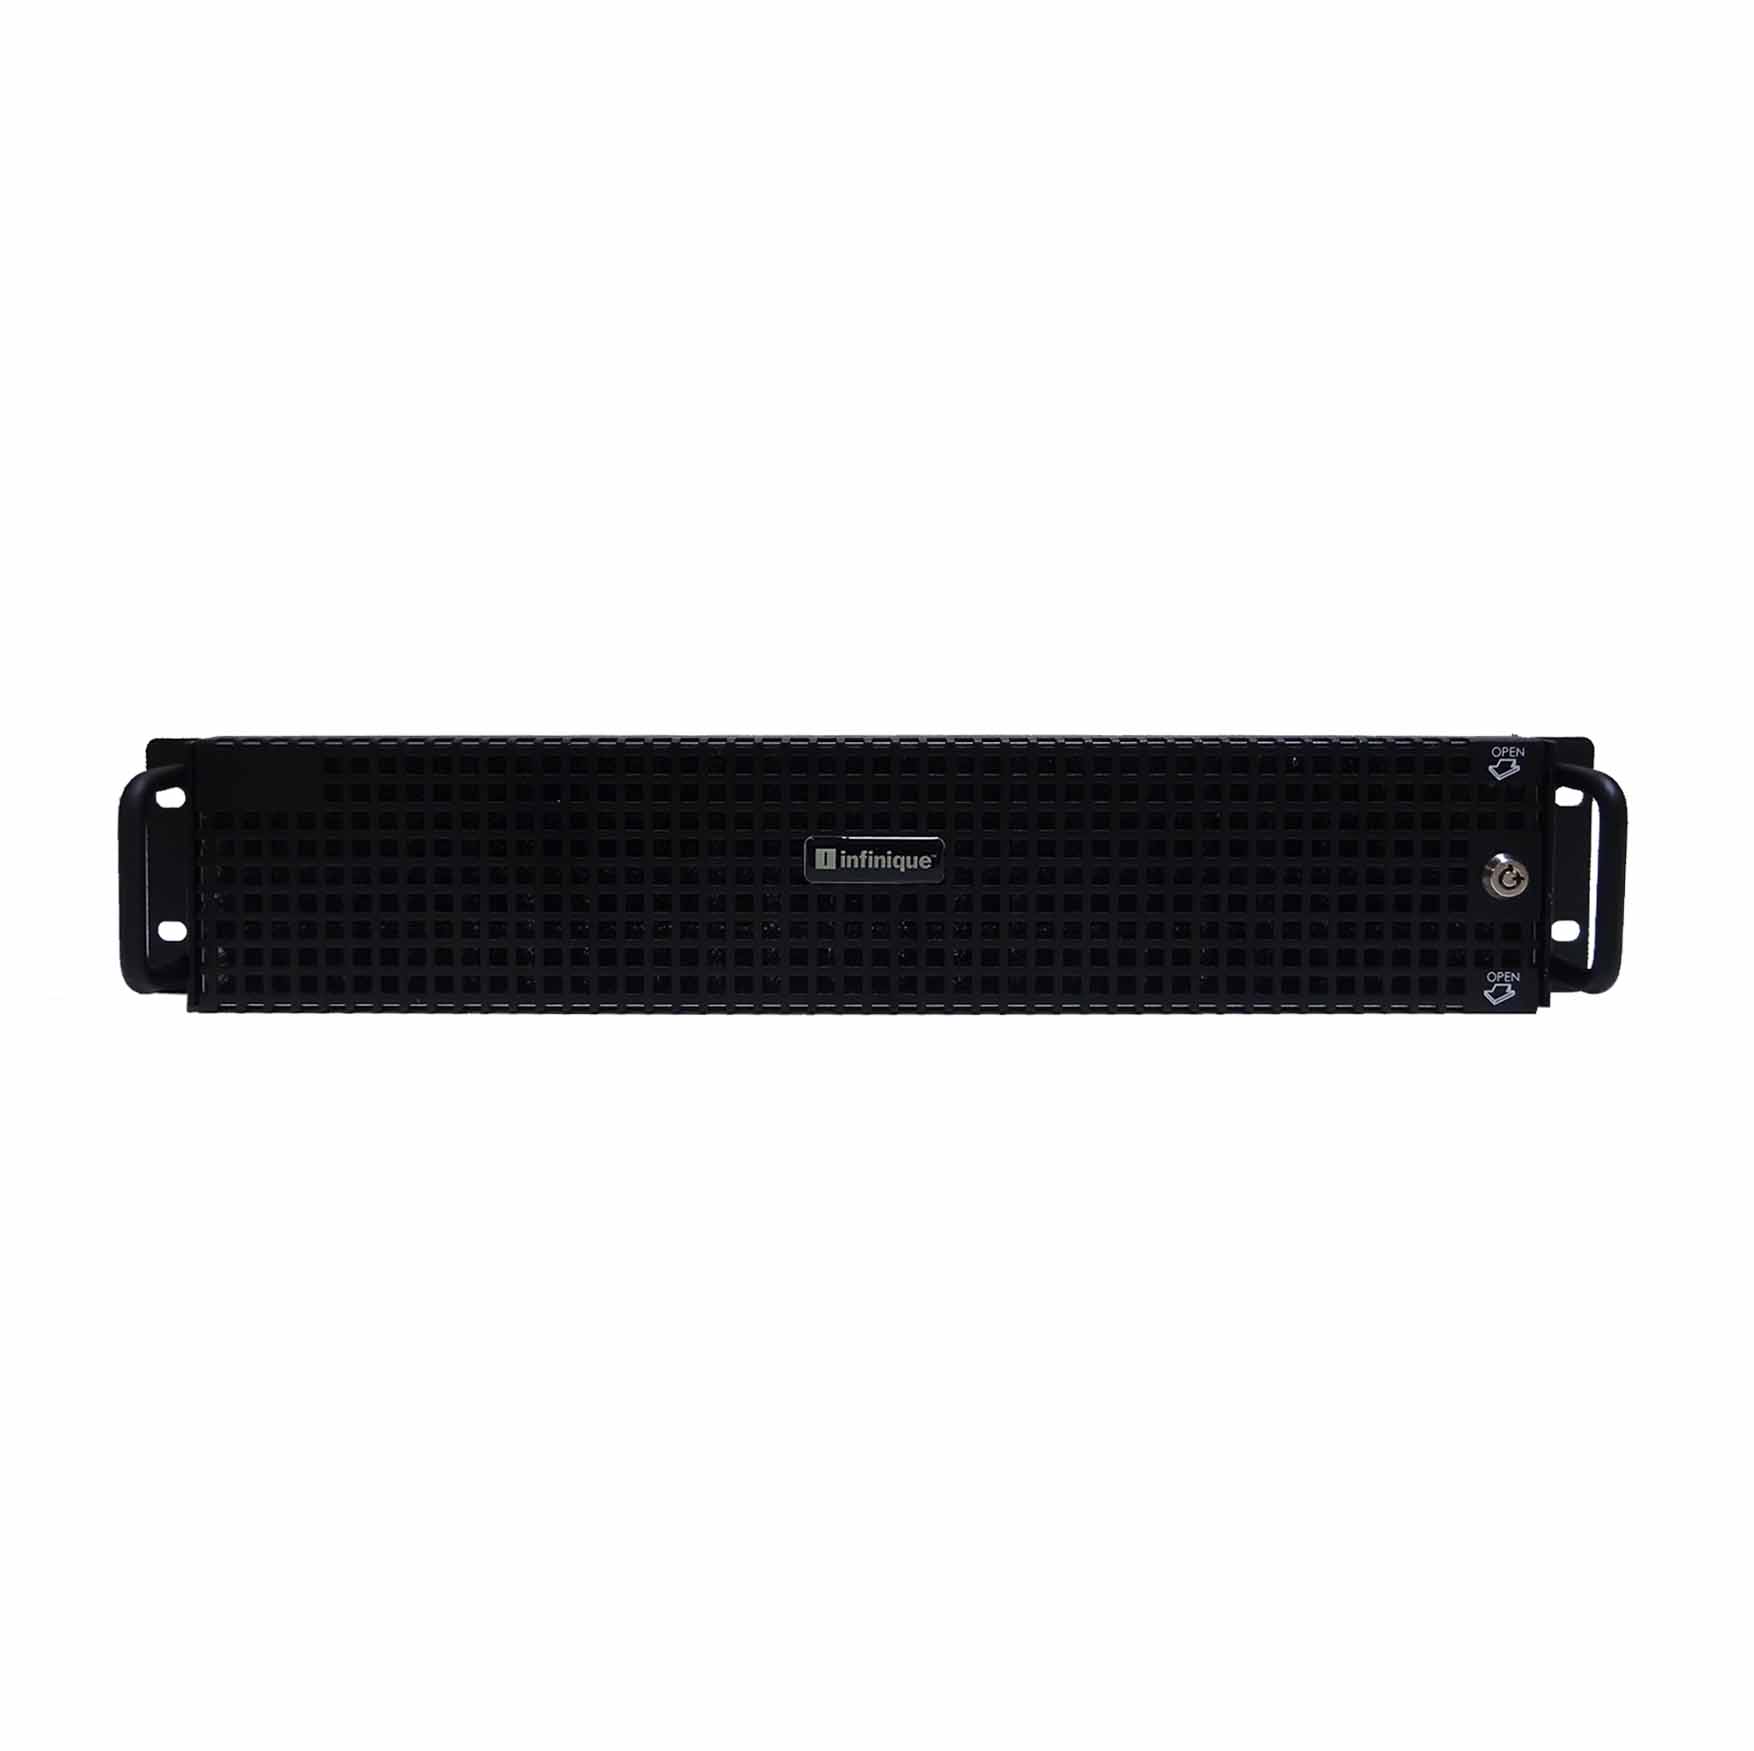 Infinique 128Ch Fortes NVR Professional Series